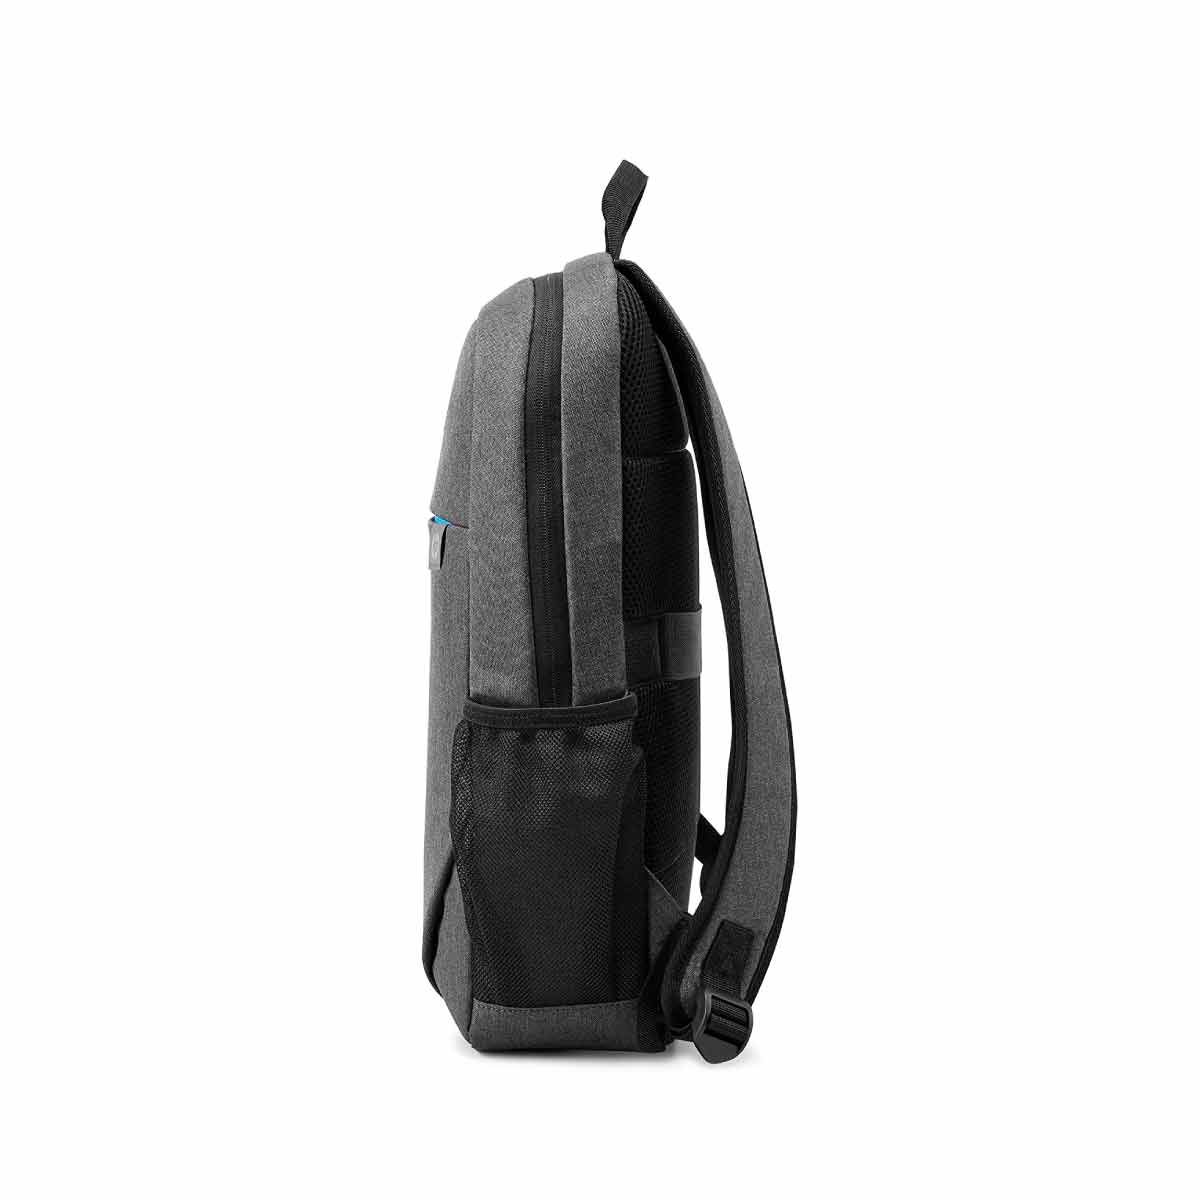 HP PRELUDE 15.6-INCH BACKPACK (2Z8P3AA)